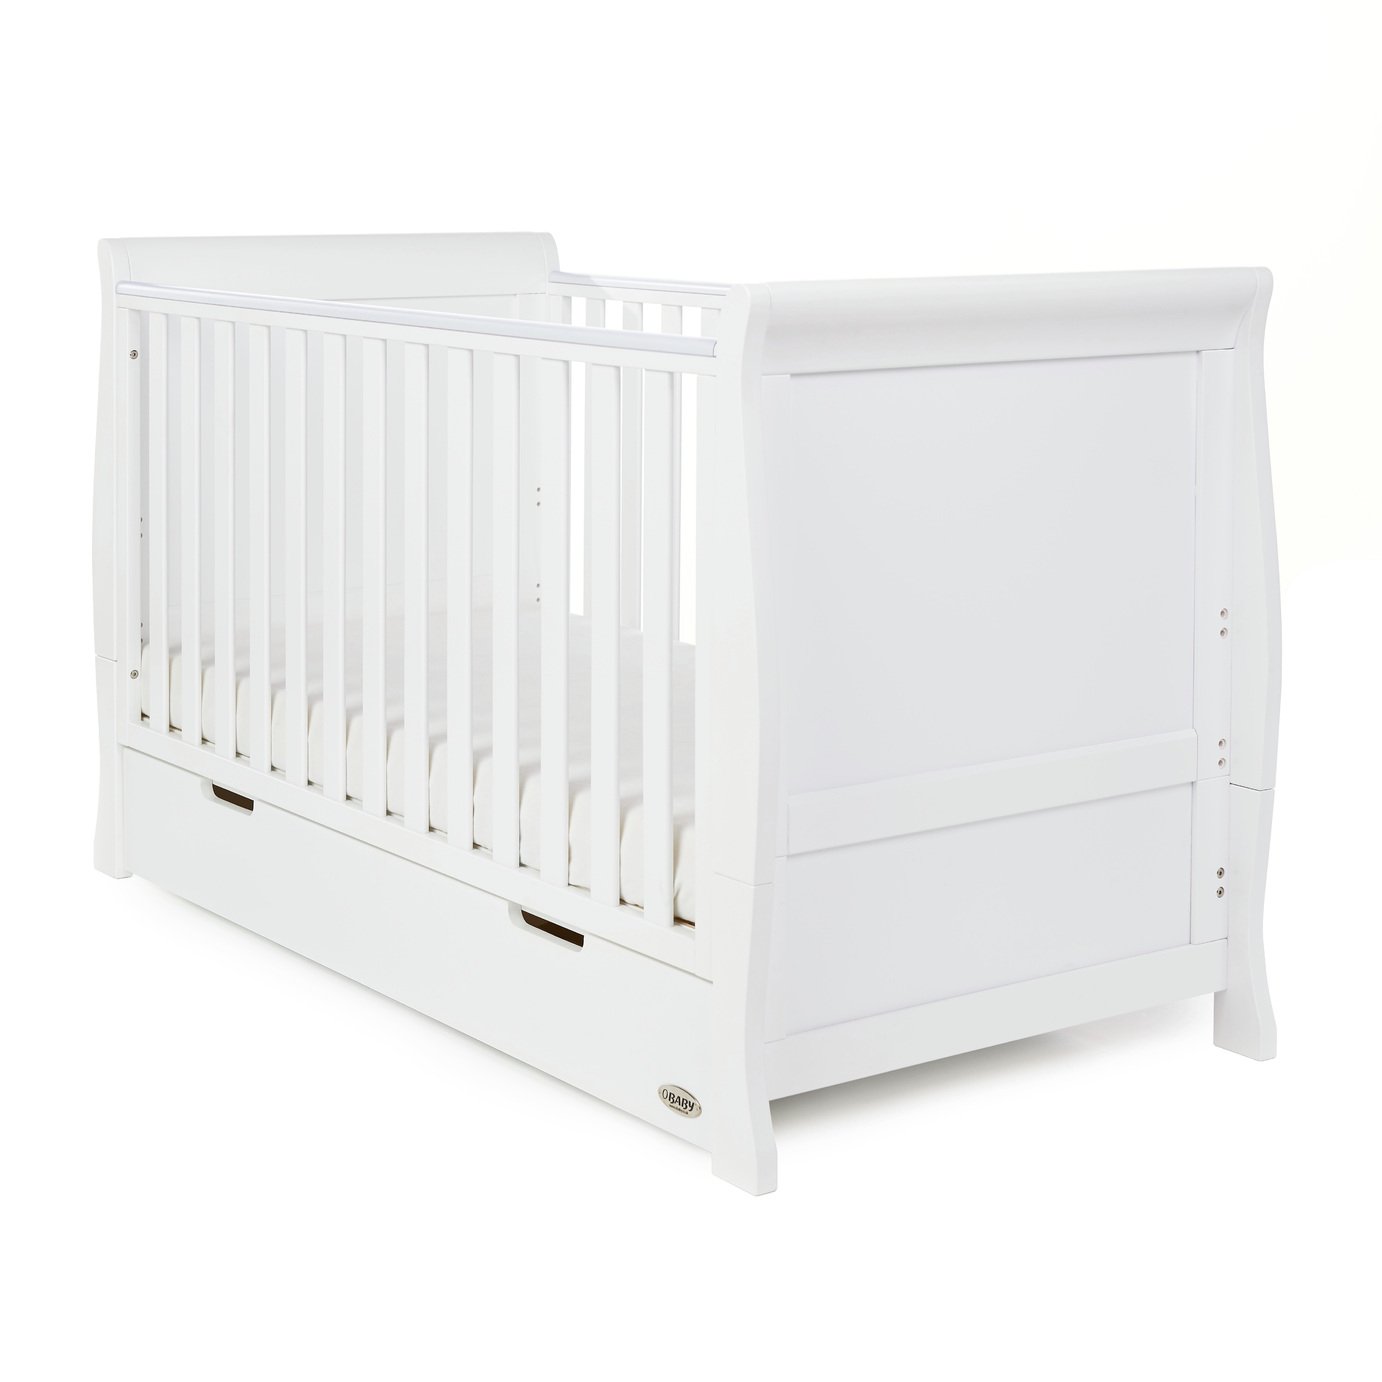 Obaby Stamford Classic Sleigh Cot Bed & Top Changer Review